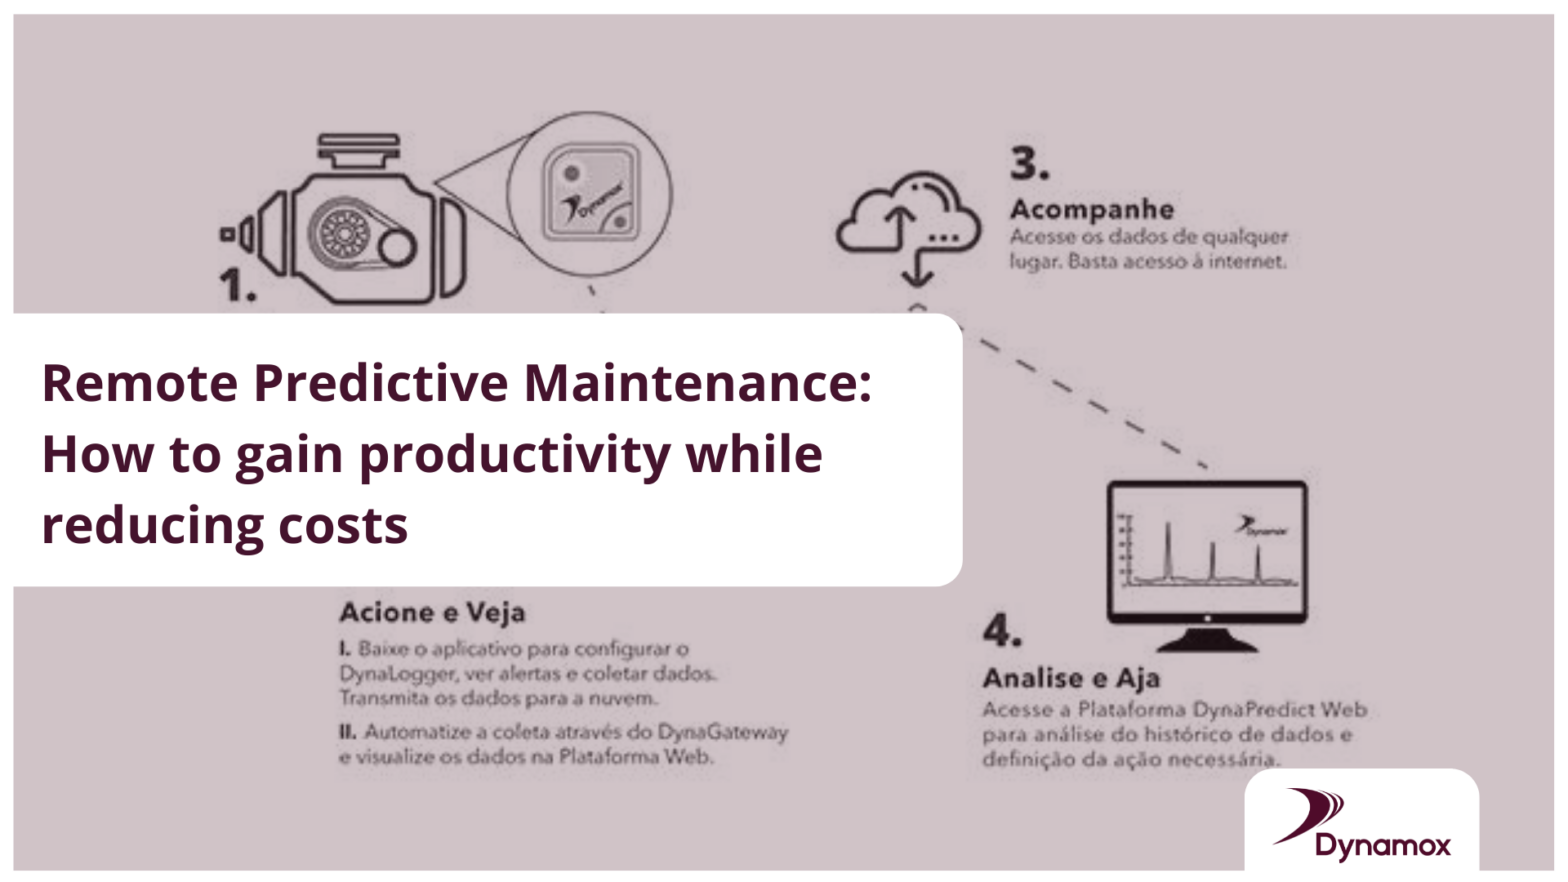 Remote Predictive Maintenance: productivity and reducing costs